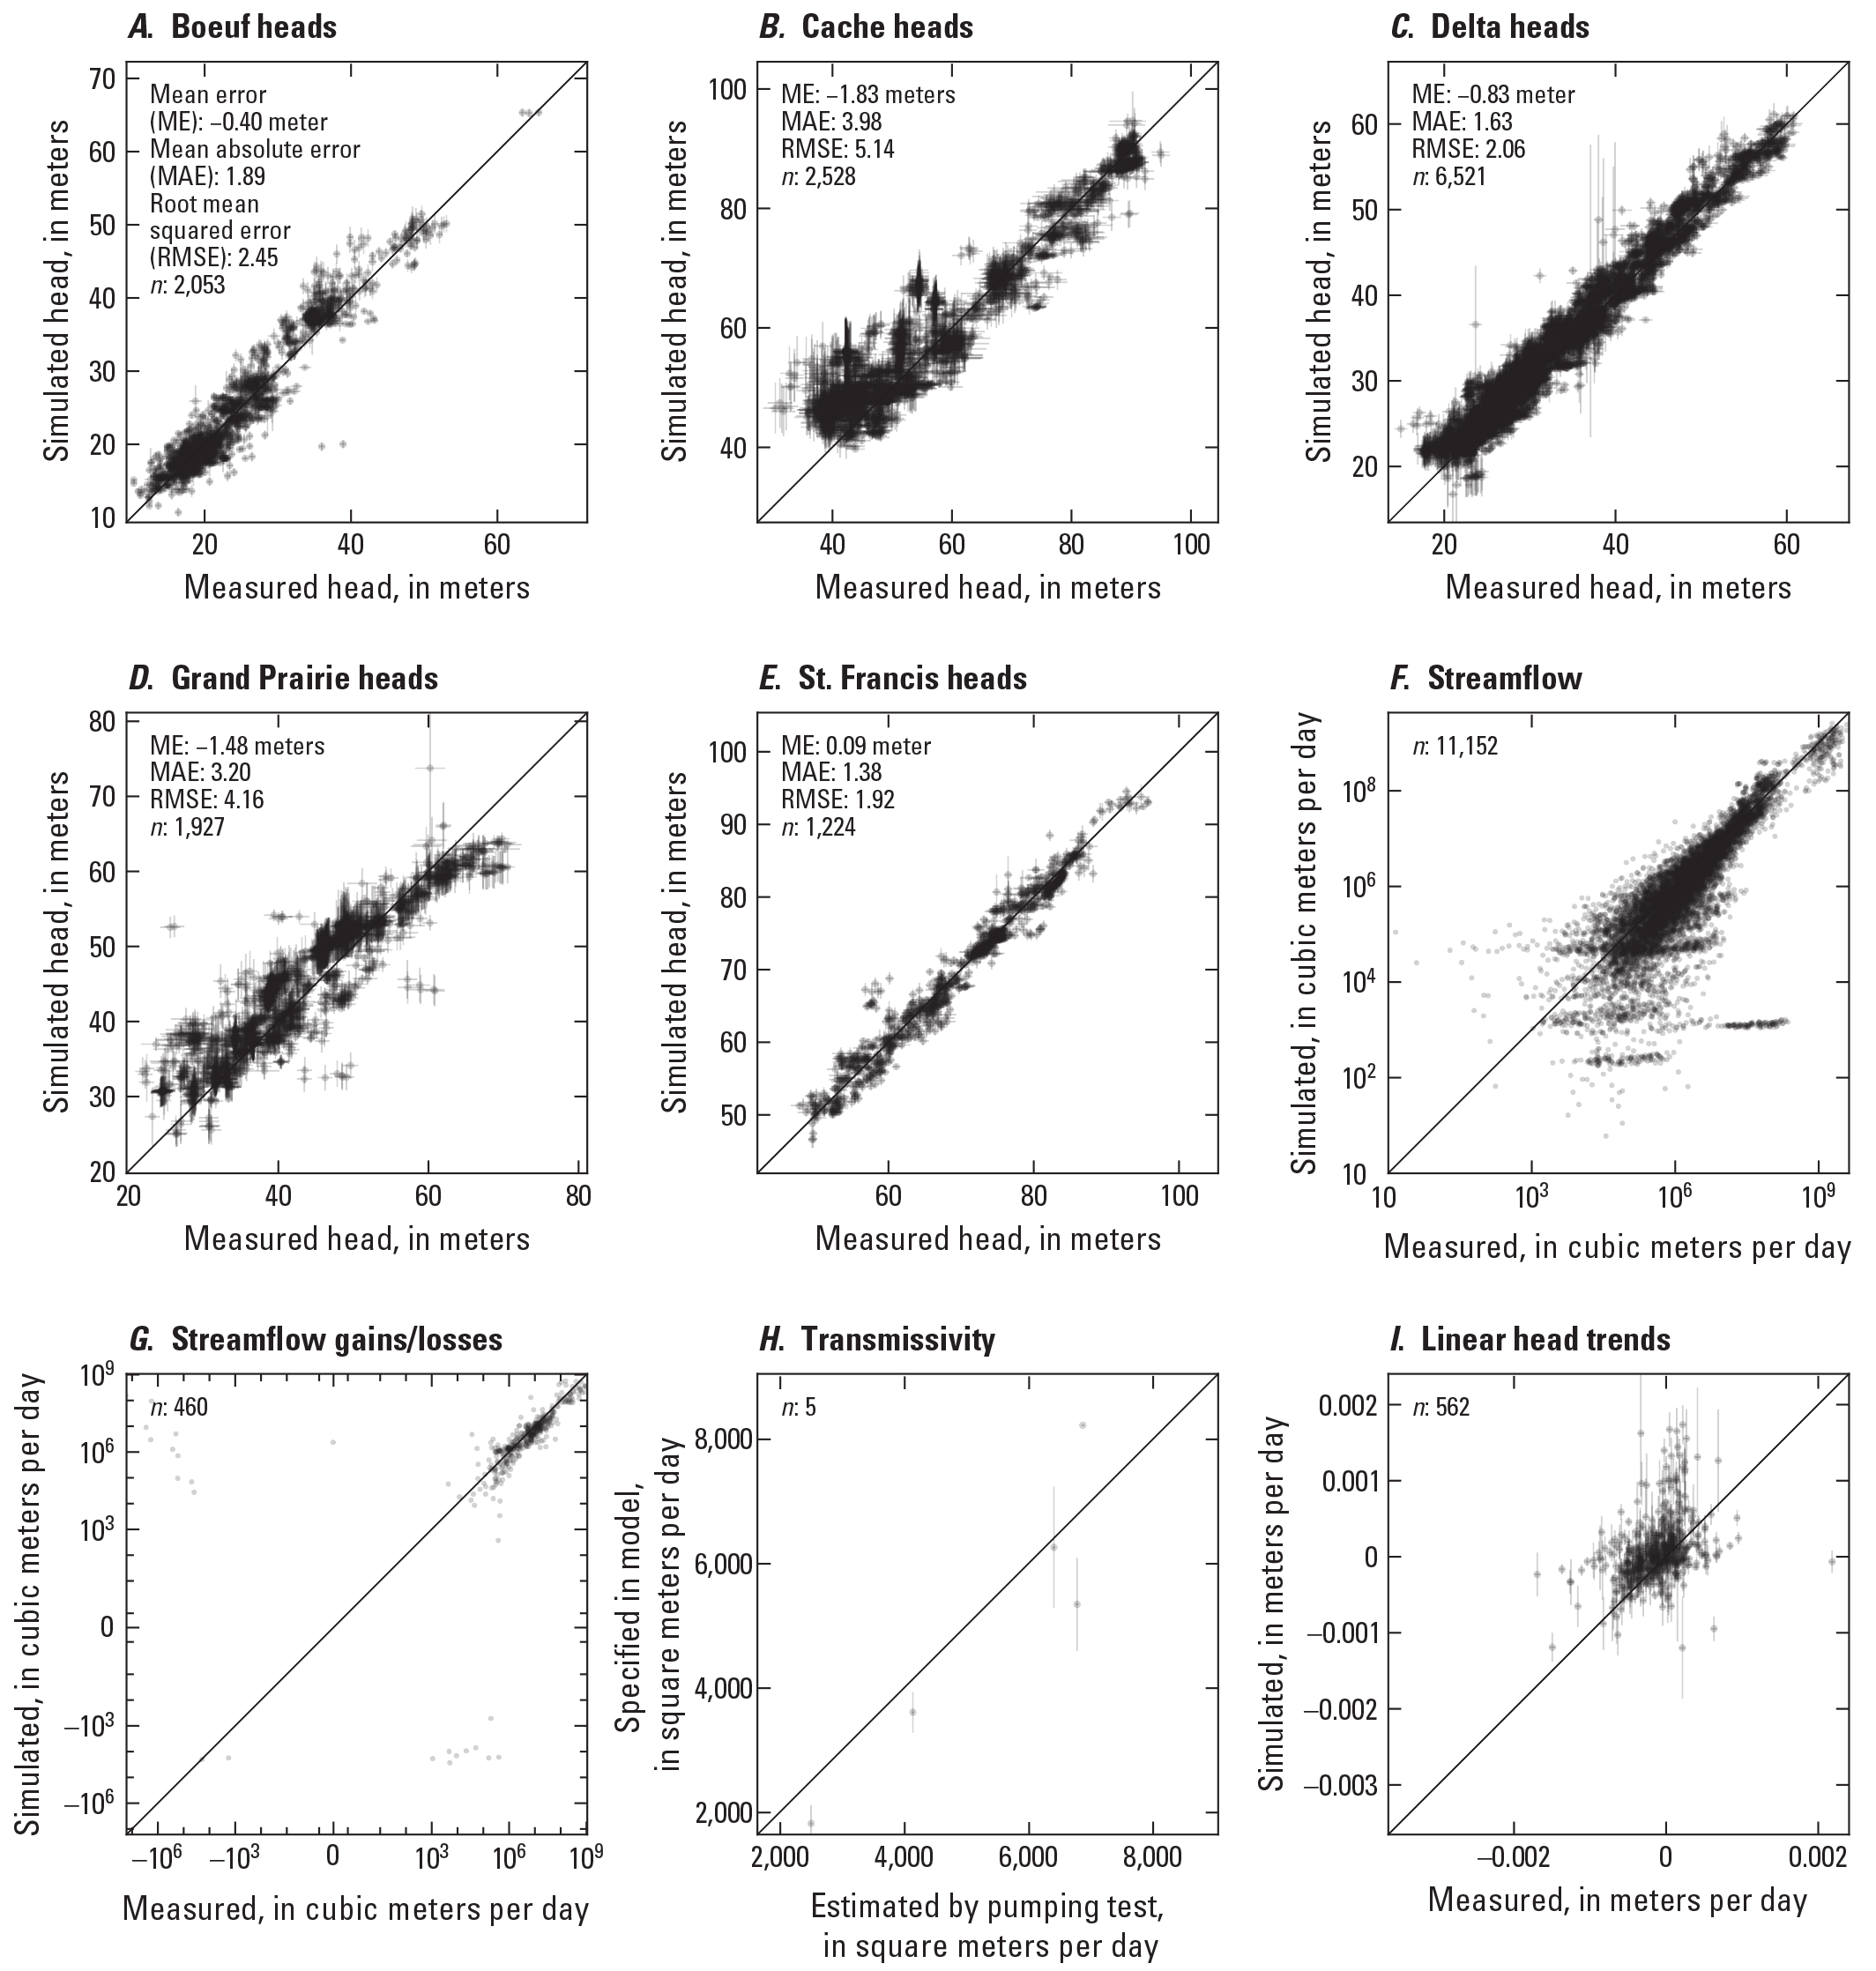 In general, good fits to head observations in the alluvial aquifer were achieved.
                     Stream flows are also well-matched, though lower flows have a greater bias towards
                     being undersimulated.